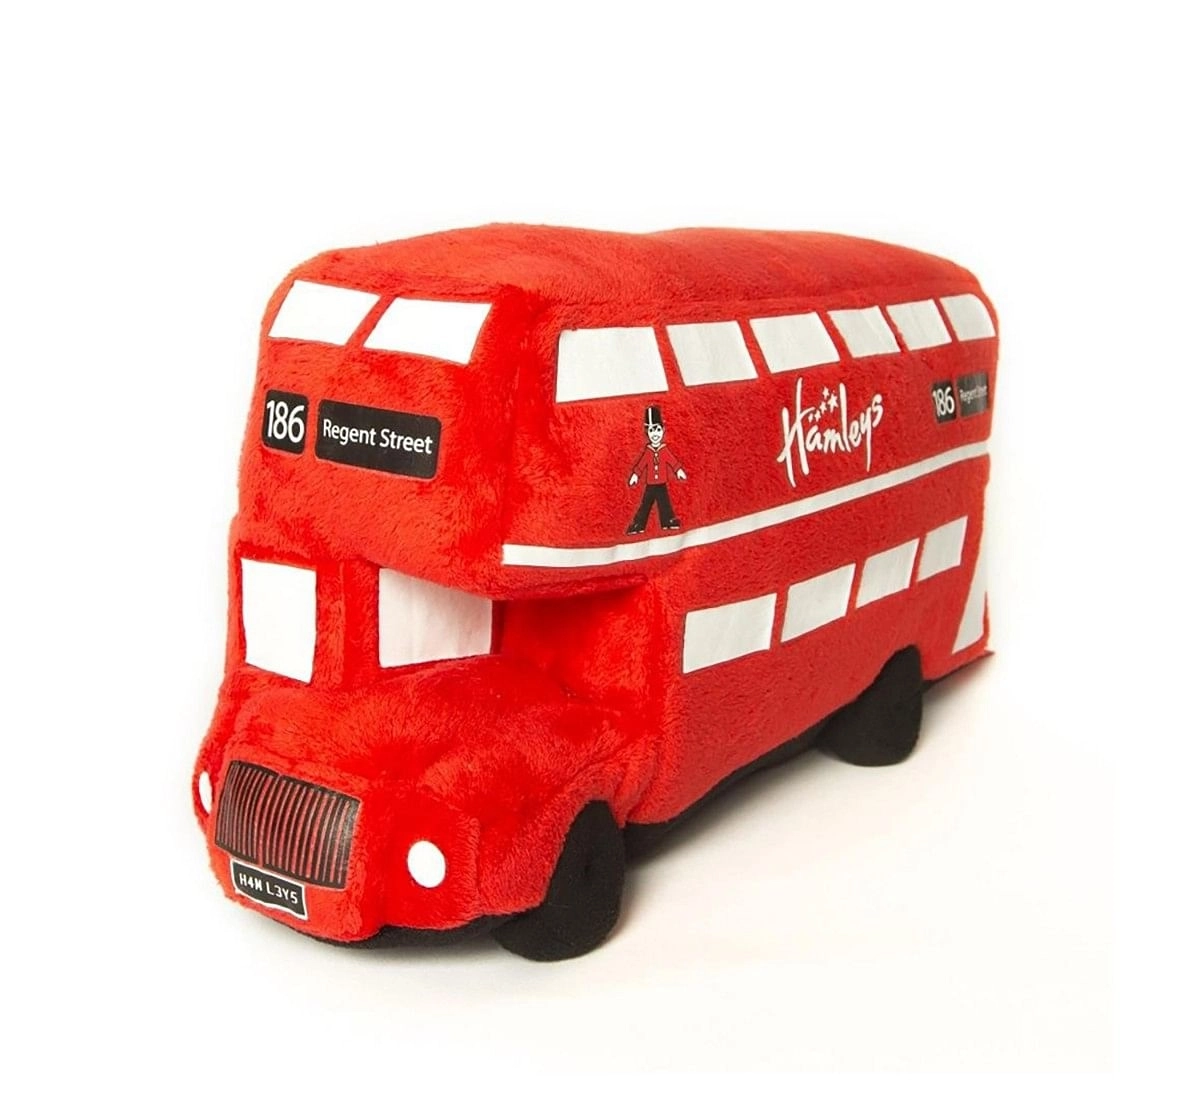  Hamleys London Bus (Red) Quirky Soft Toys for Kids age 3Y+ - 12 Cm 